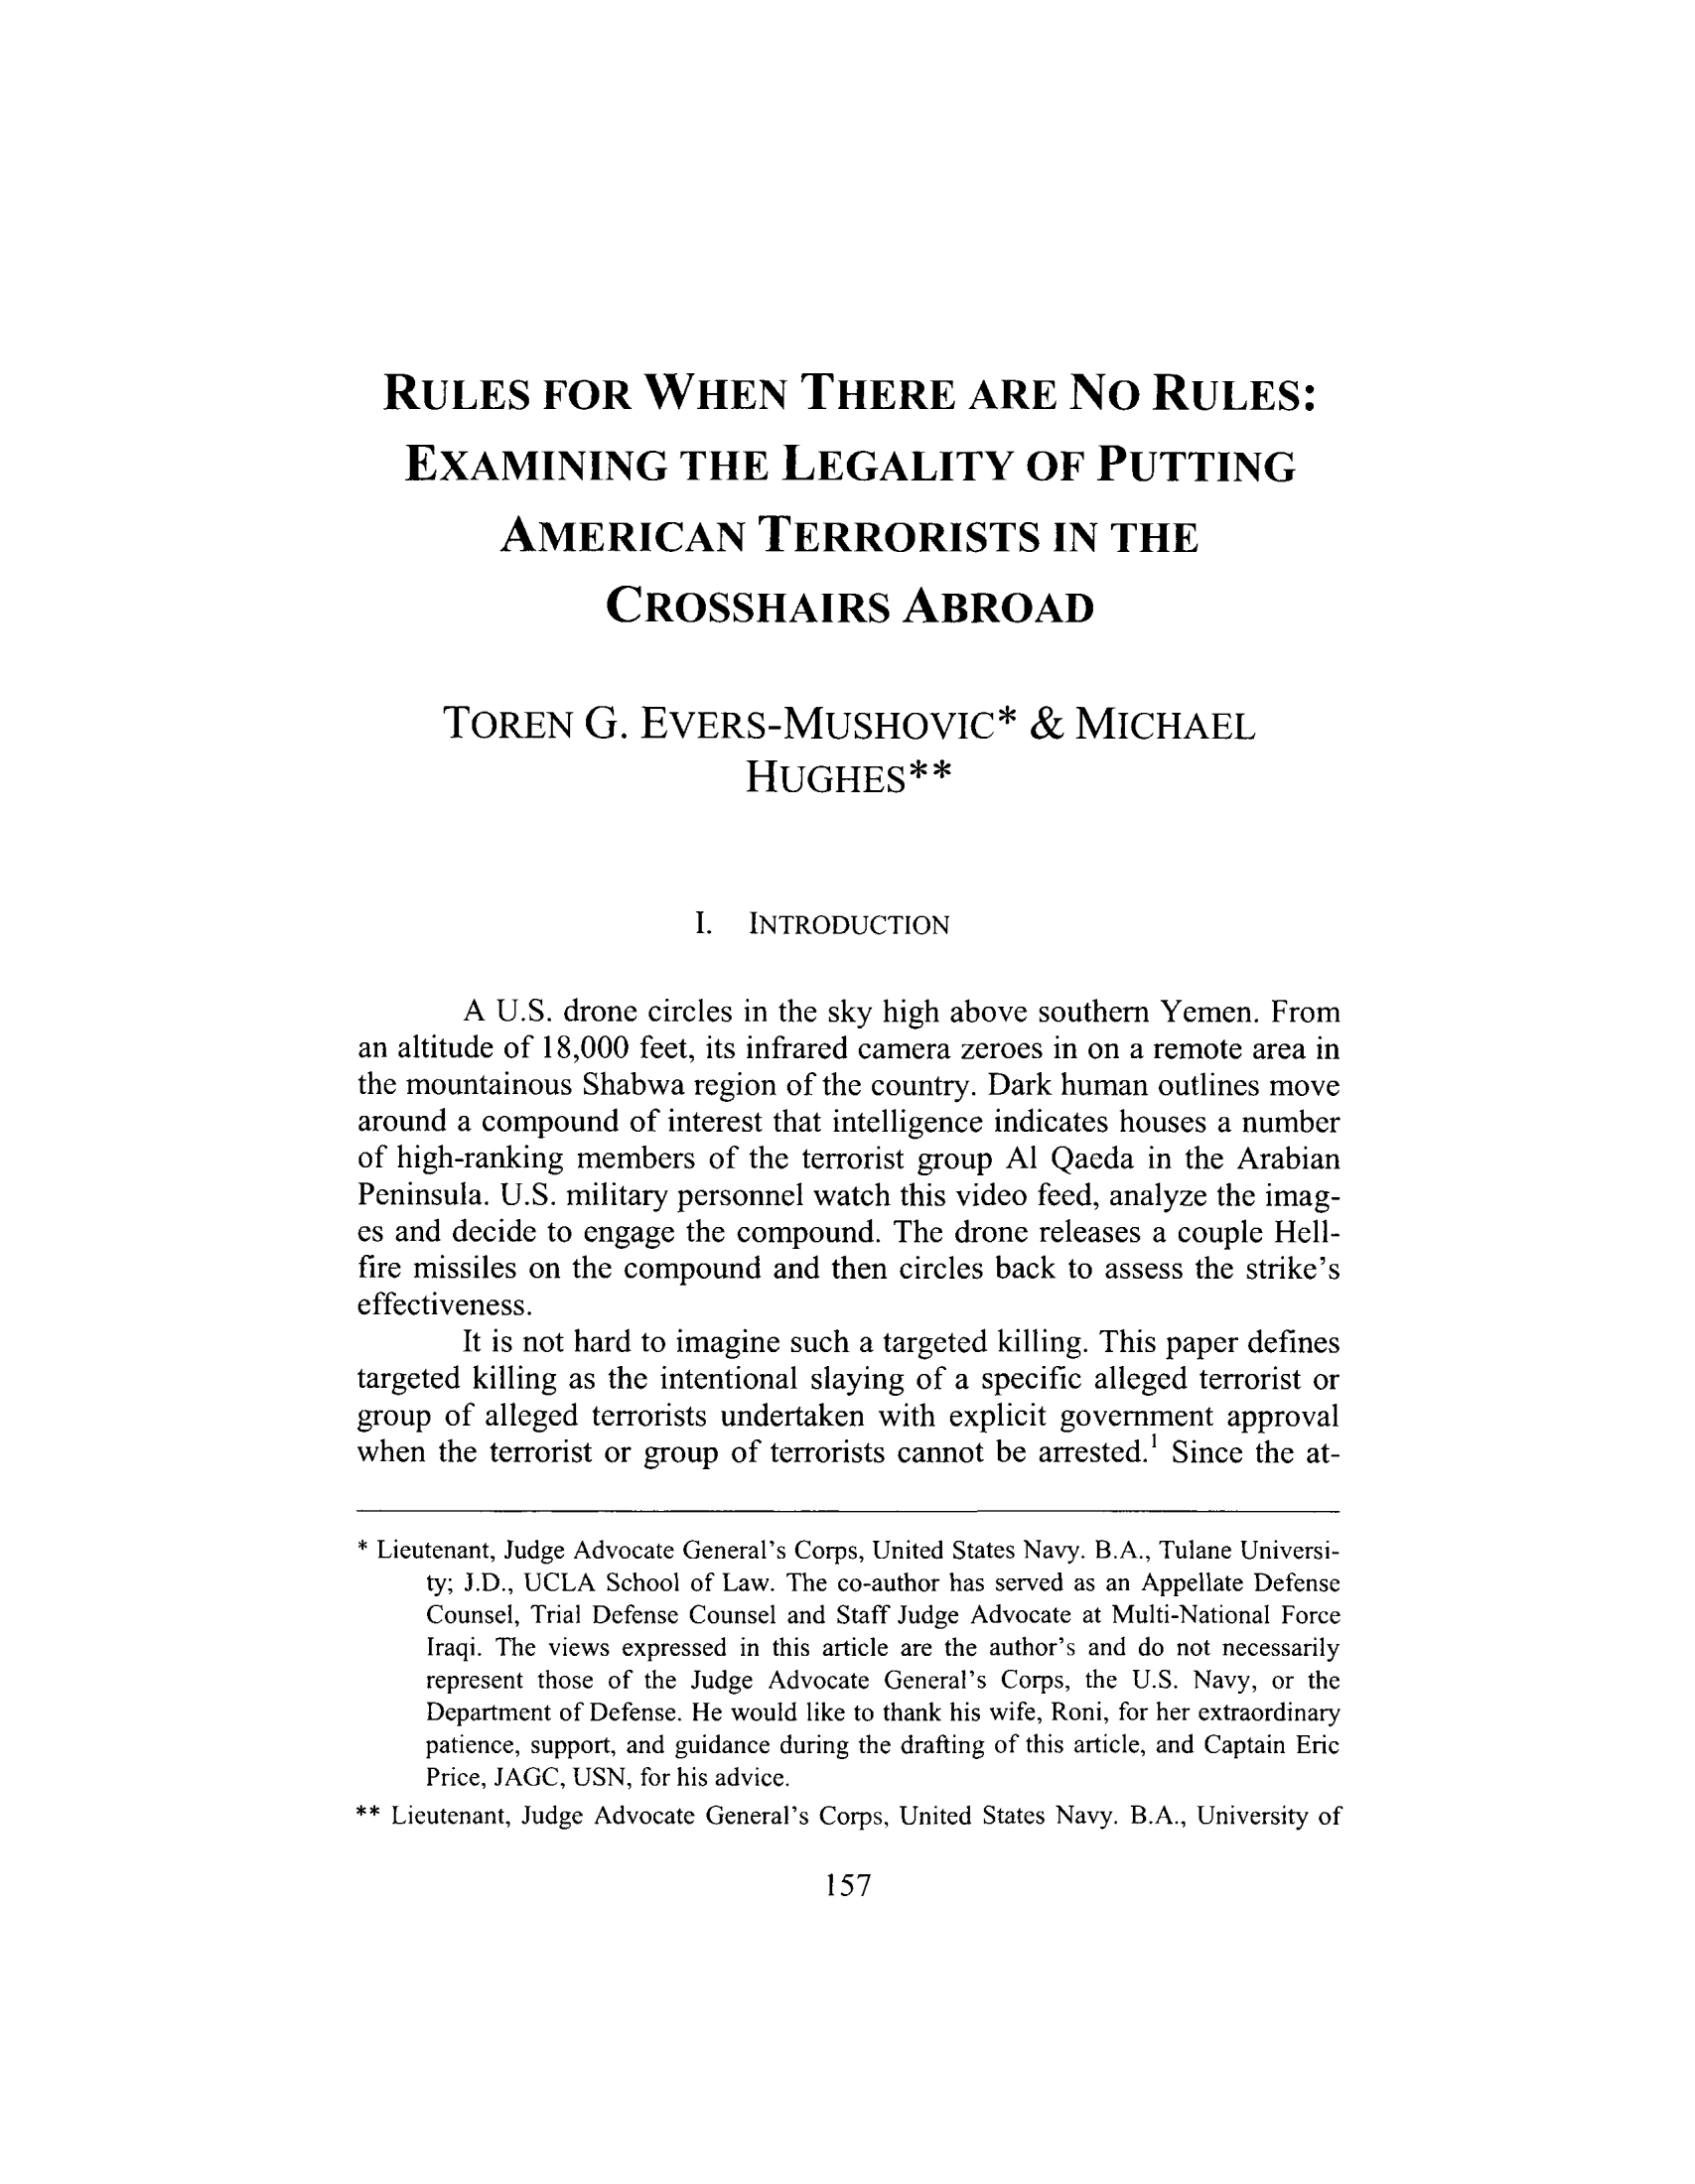 handle is hein.journals/newenjic18 and id is 159 raw text is: ï»¿RULES FOR WHEN THERE ARE No RULES:EXAMINING THE LEGALITY OF PUTTINGAMERICAN TERRORISTS IN THECROSSHAIRS ABROADTOREN G. EVERS-MUSHOVIC* & MICHAELHUGHES**I. INTRODUCTIONA U.S. drone circles in the sky high above southern Yemen. Froman altitude of 18,000 feet, its infrared camera zeroes in on a remote area inthe mountainous Shabwa region of the country. Dark human outlines movearound a compound of interest that intelligence indicates houses a numberof high-ranking members of the terrorist group Al Qaeda in the ArabianPeninsula. U.S. military personnel watch this video feed, analyze the imag-es and decide to engage the compound. The drone releases a couple Hell-fire missiles on the compound and then circles back to assess the strike'seffectiveness.It is not hard to imagine such a targeted killing. This paper definestargeted killing as the intentional slaying of a specific alleged terrorist orgroup of alleged terrorists undertaken with explicit government approvalwhen the terrorist or group of terrorists cannot be arrested.' Since the at-* Lieutenant, Judge Advocate General's Corps, United States Navy. B.A., Tulane Universi-ty; J.D., UCLA School of Law. The co-author has served as an Appellate DefenseCounsel, Trial Defense Counsel and Staff Judge Advocate at Multi-National ForceIraqi. The views expressed in this article are the author's and do not necessarilyrepresent those of the Judge Advocate General's Corps, the U.S. Navy, or theDepartment of Defense. He would like to thank his wife, Roni, for her extraordinarypatience, support, and guidance during the drafting of this article, and Captain EricPrice, JAGC, USN, for his advice.** Lieutenant, Judge Advocate General's Corps, United States Navy. B.A., University of157